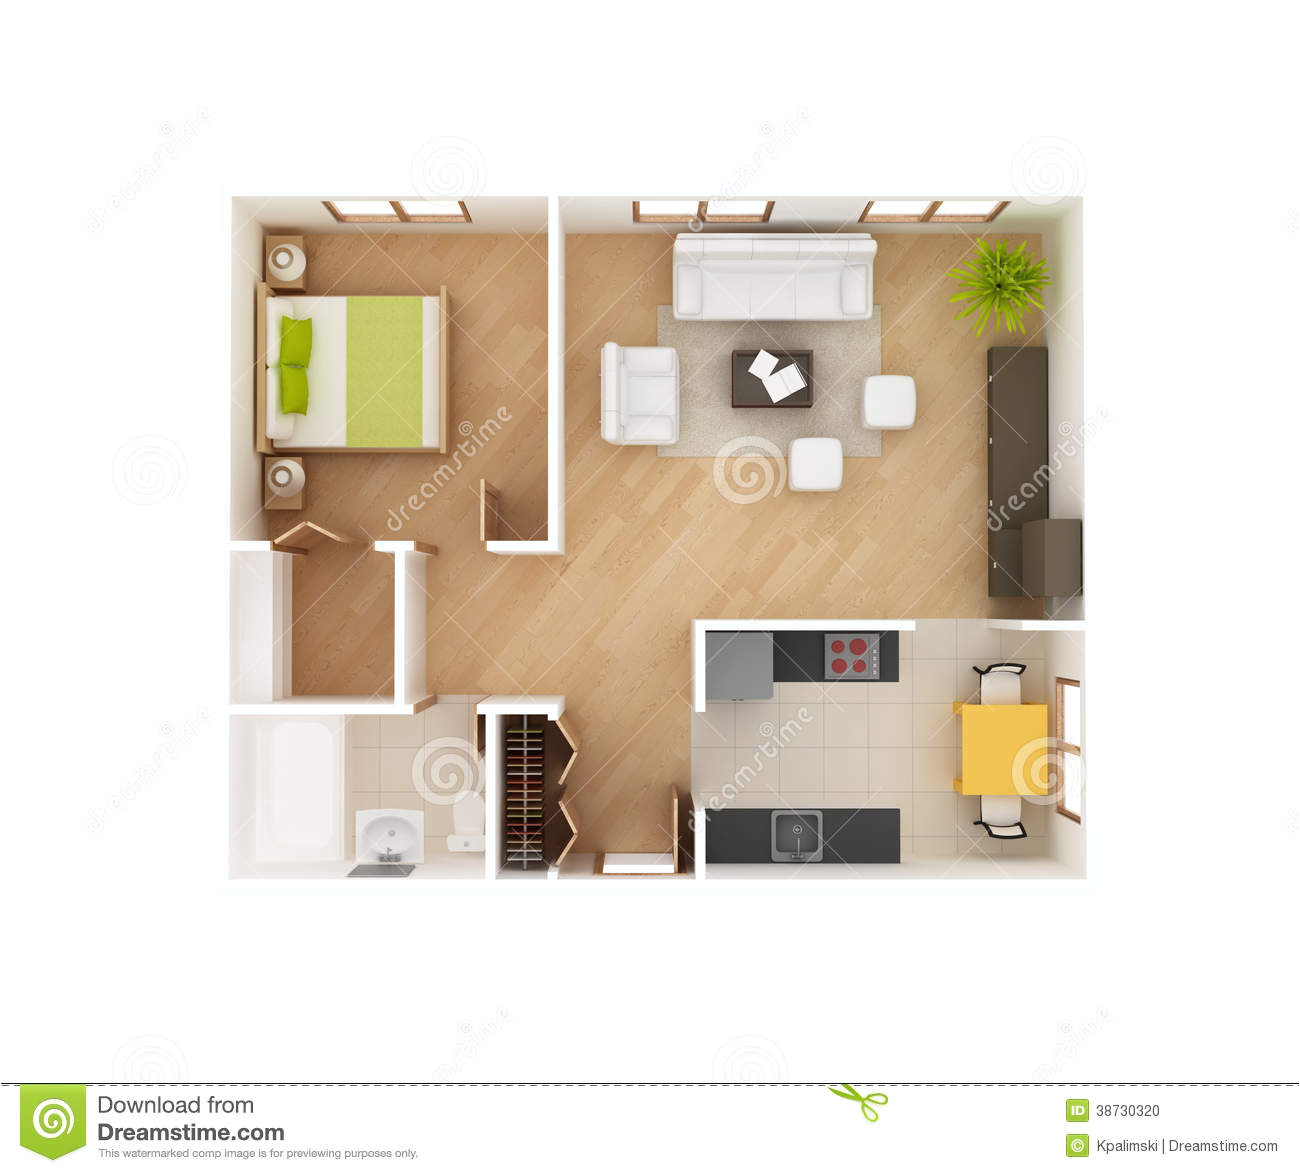 View House Plans Online Basic 3d House Floor Plan top View Stock Illustration